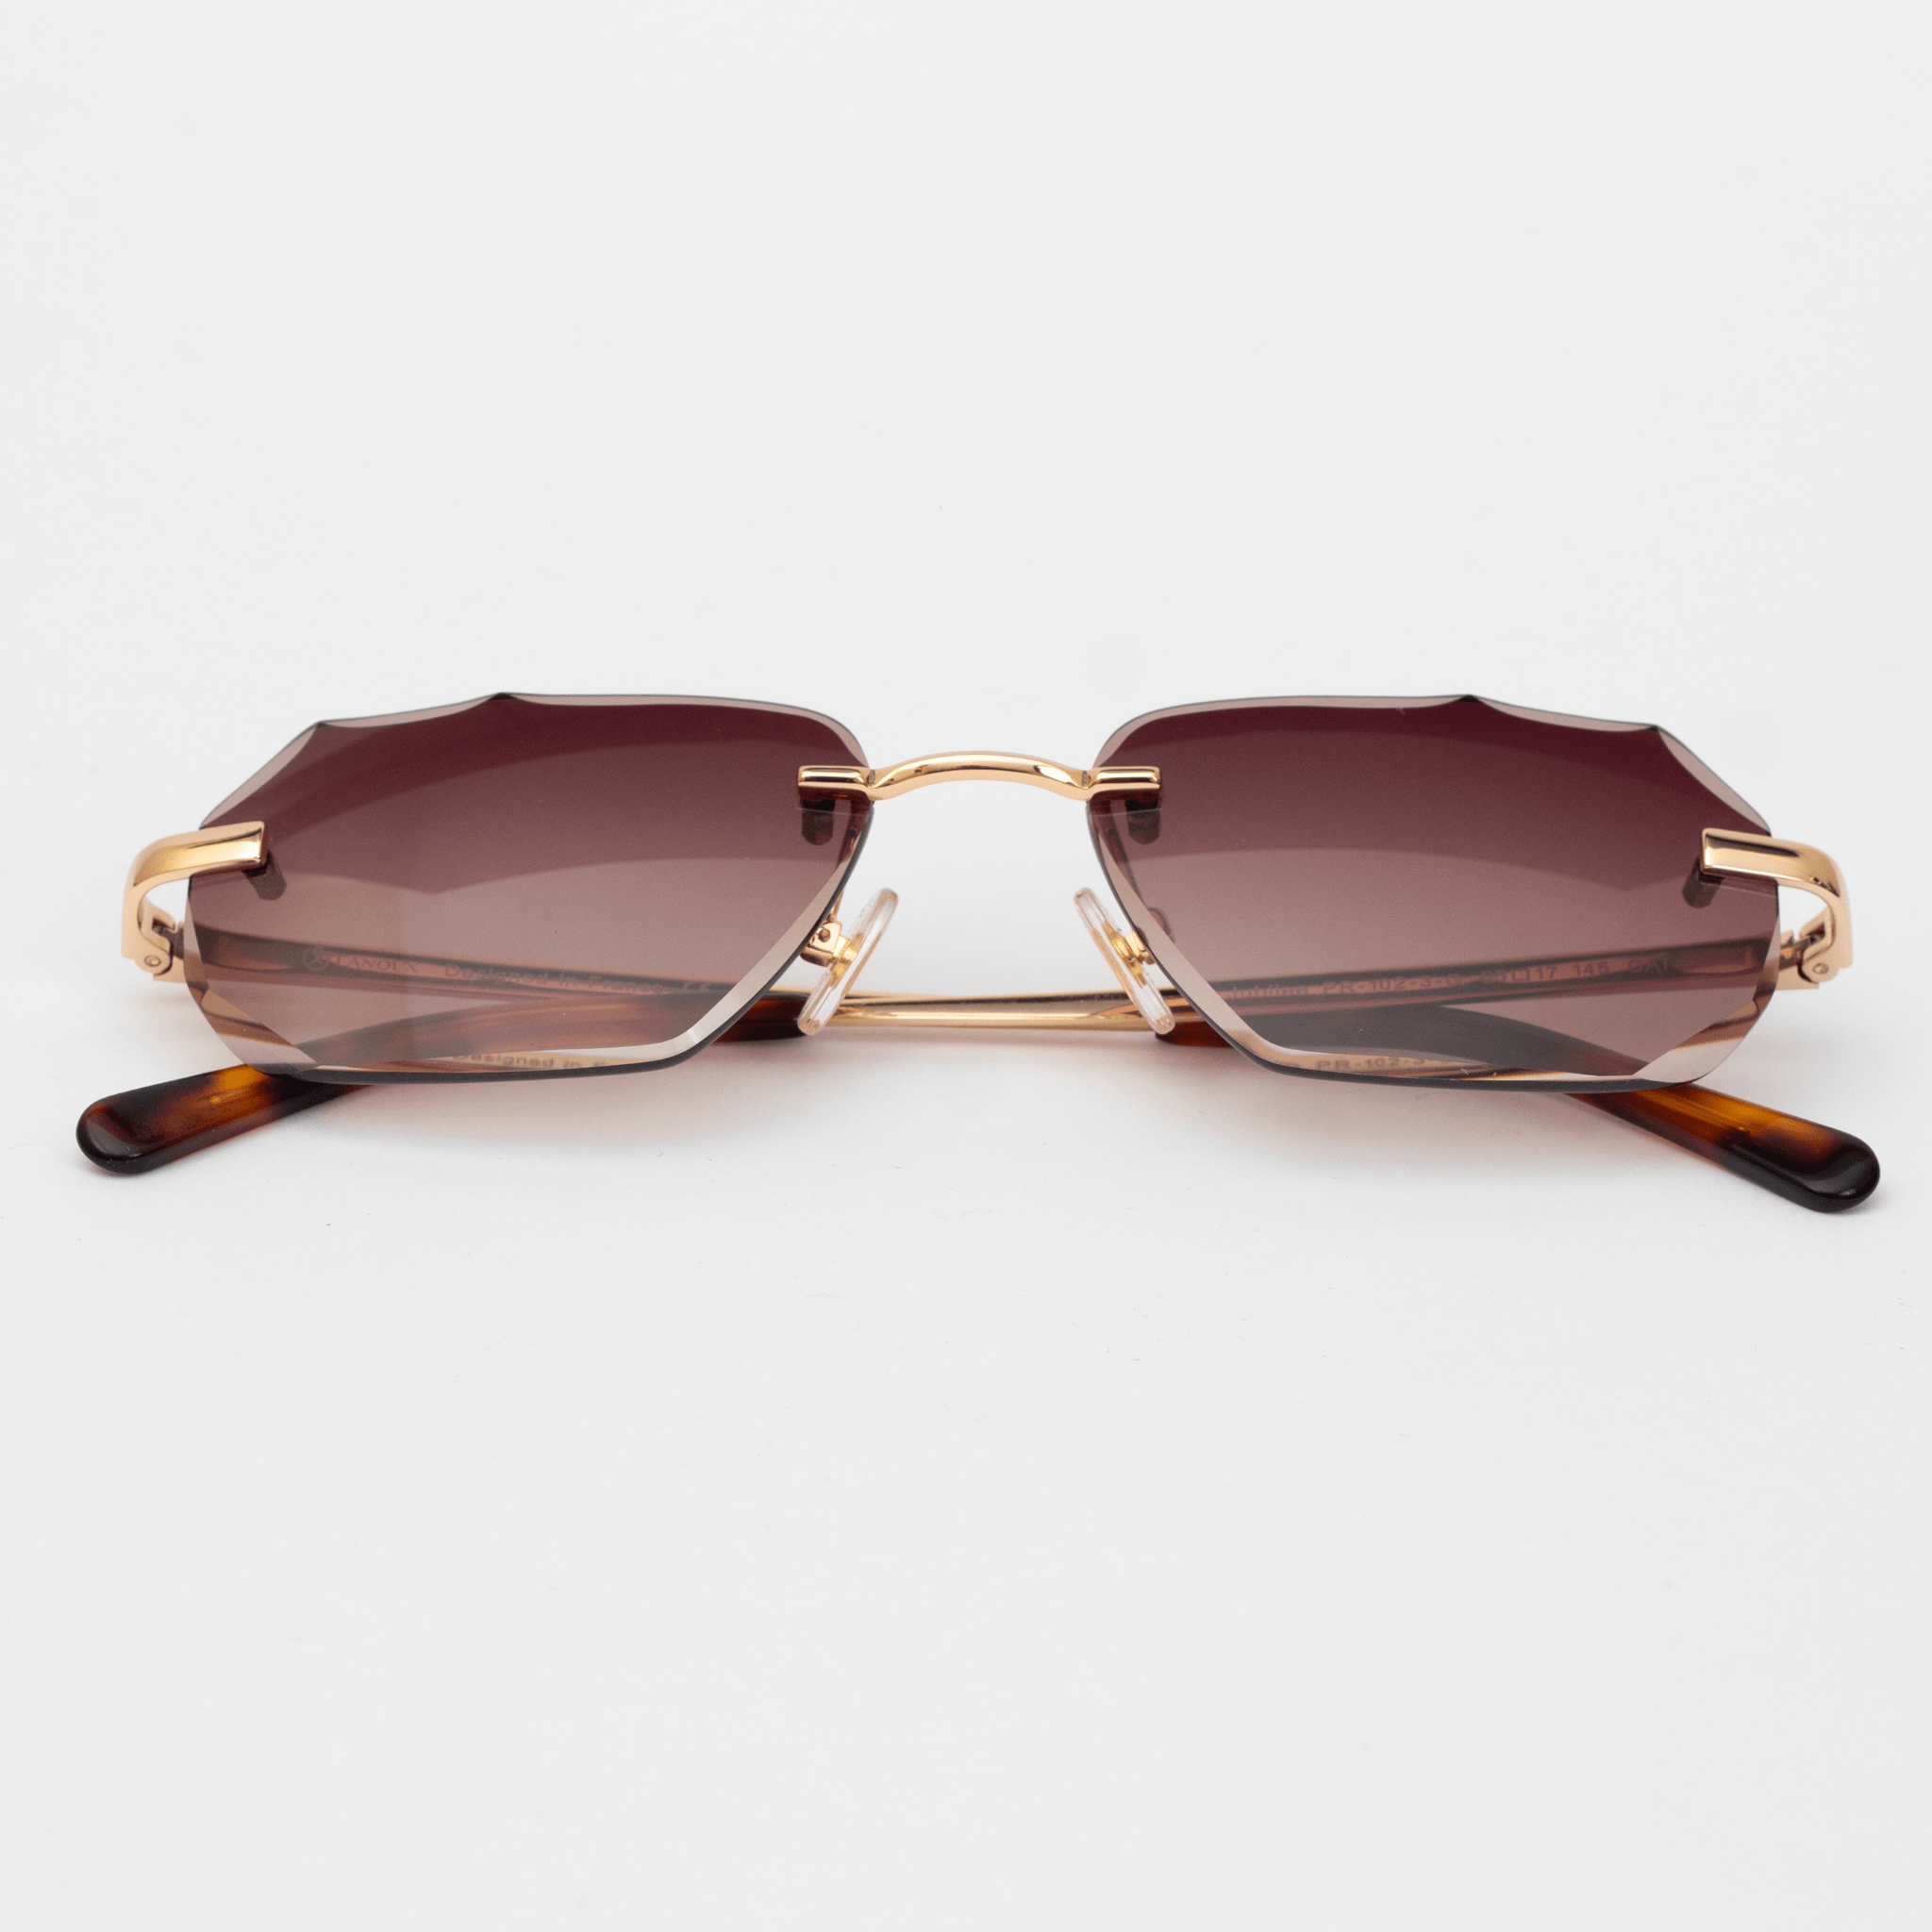 Elegant rimless sunglasses featuring a unique diamond-cut lens design, with 18k gold-plated hardware. The arms display a tortoiseshell pattern, complementing the brown gradient of the diamond-cut lenses.